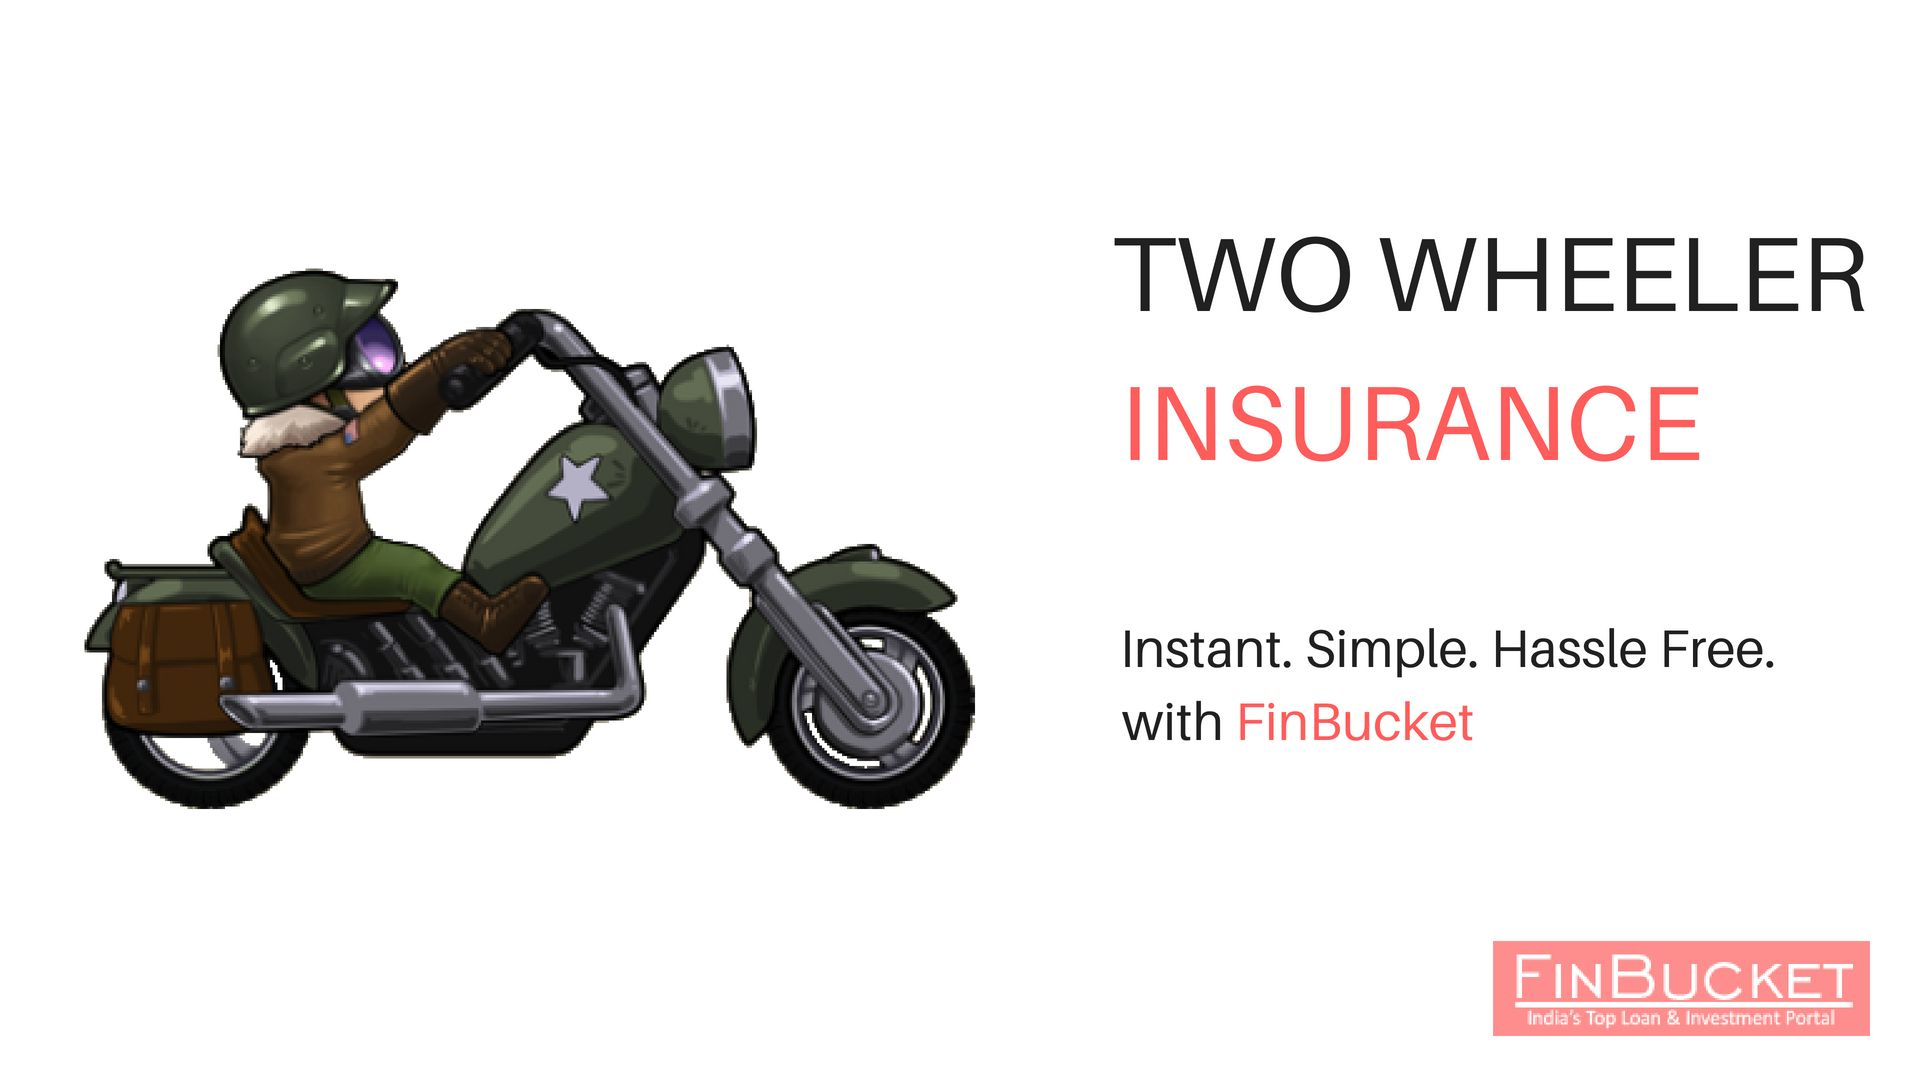 Two Wheeler Insurance Insurance Car Insurance Investing intended for size 1920 X 1080